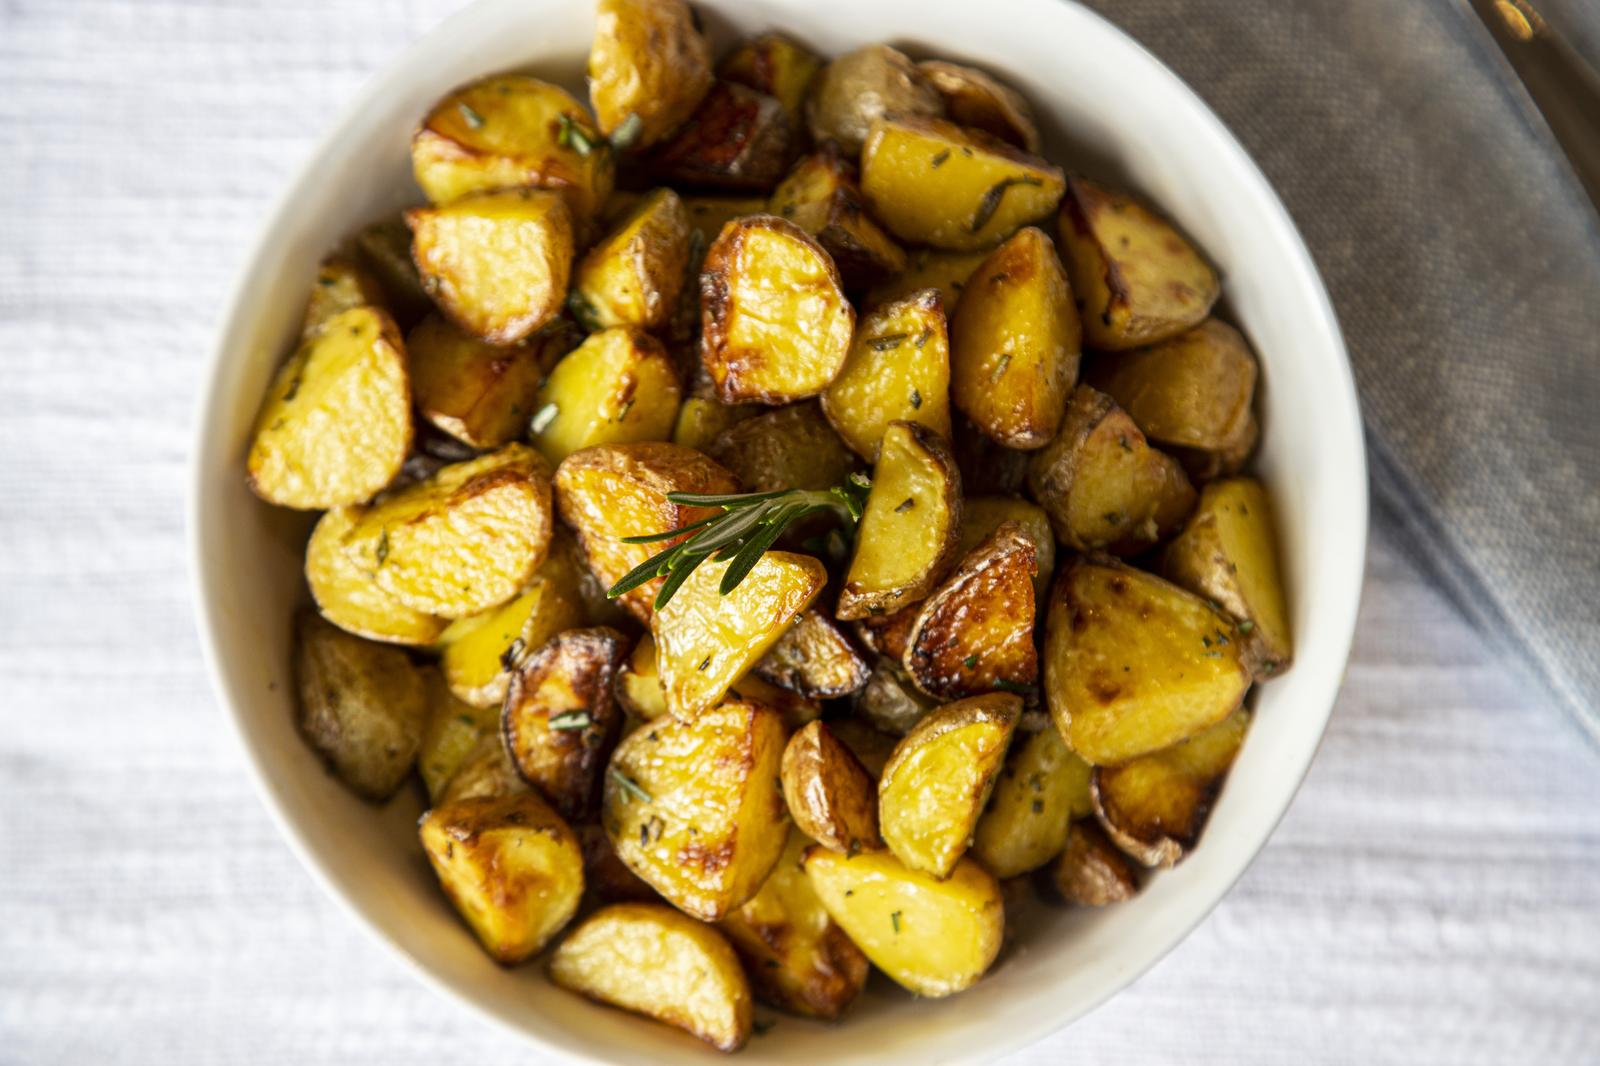 Make Yourself Proud by Passing This Geography Test That Gets Progressively Harder Potatoes